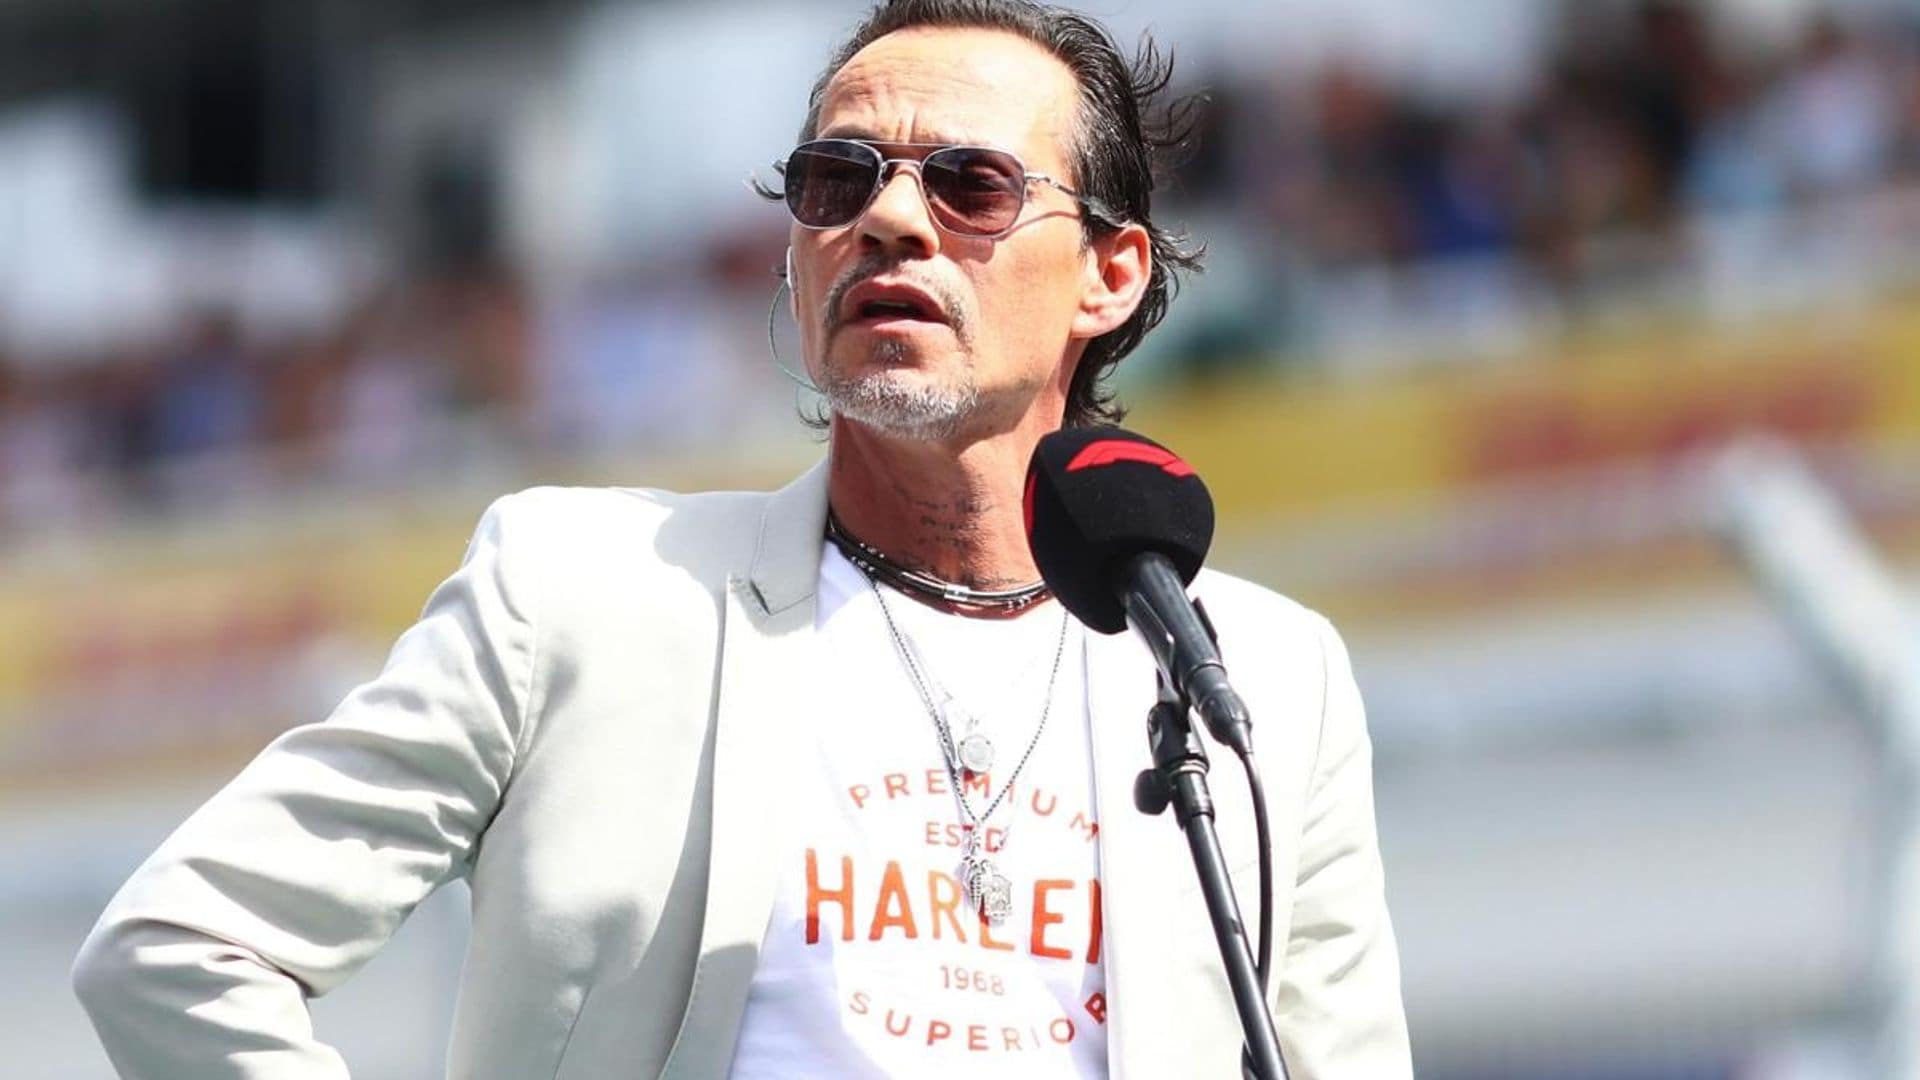 Marc Anthony enjoys Miami F1 and performs the national anthem